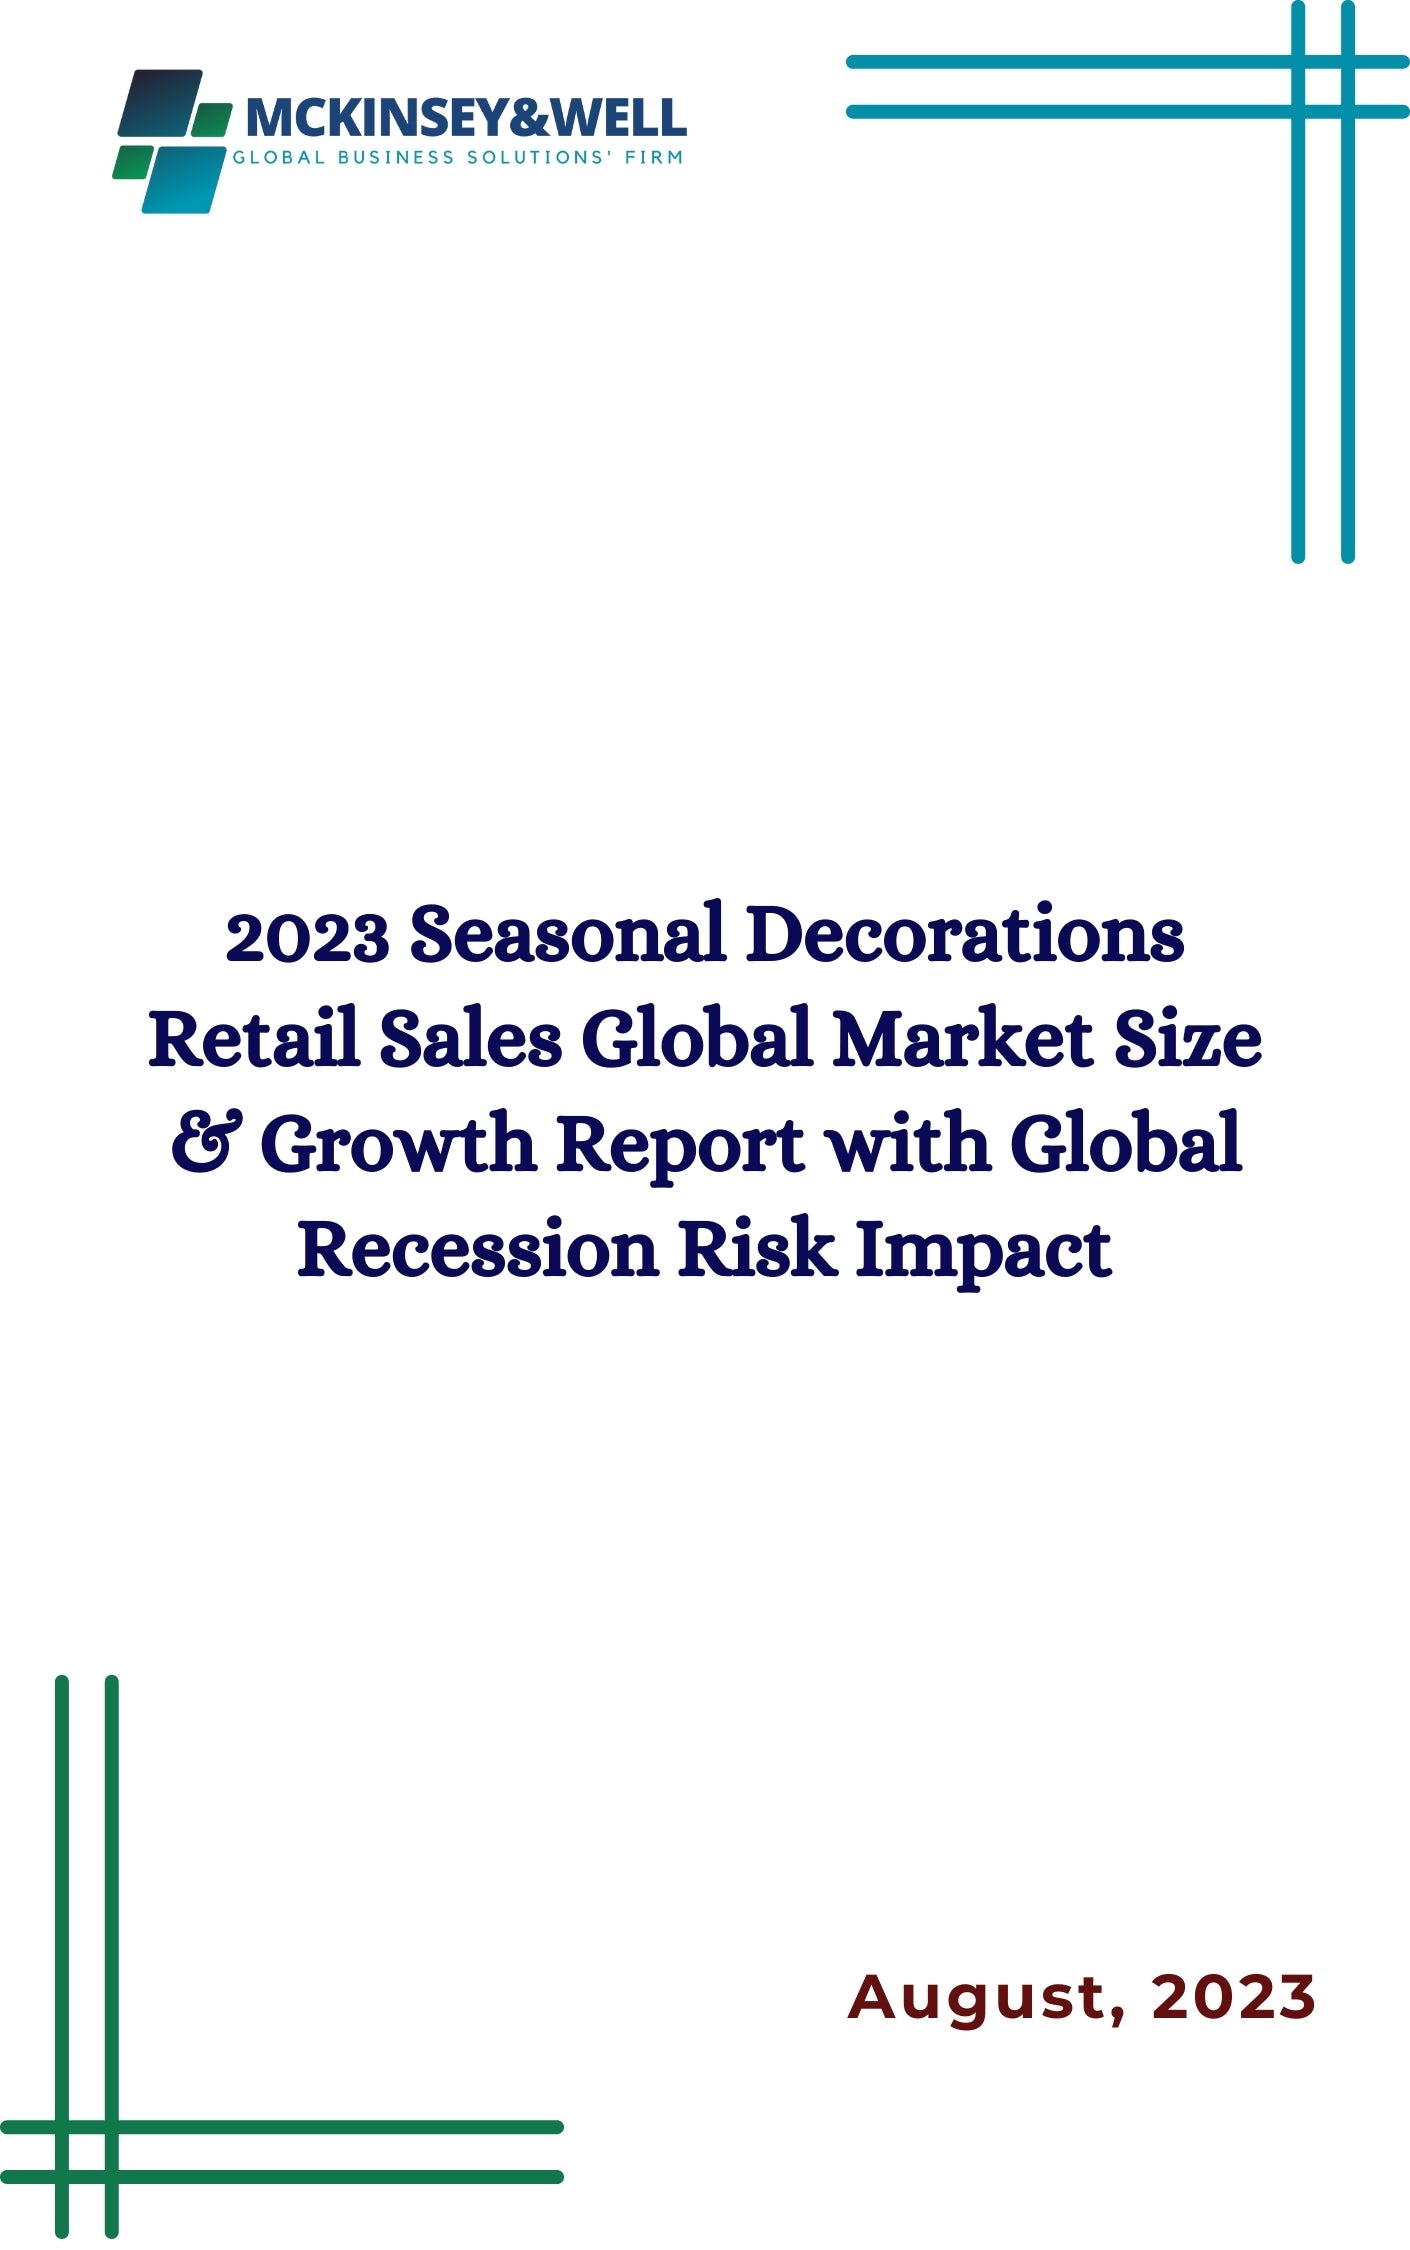 2023 Seasonal Decorations Retail Sales Global Market Size & Growth Report with Global Recession Risk Impact